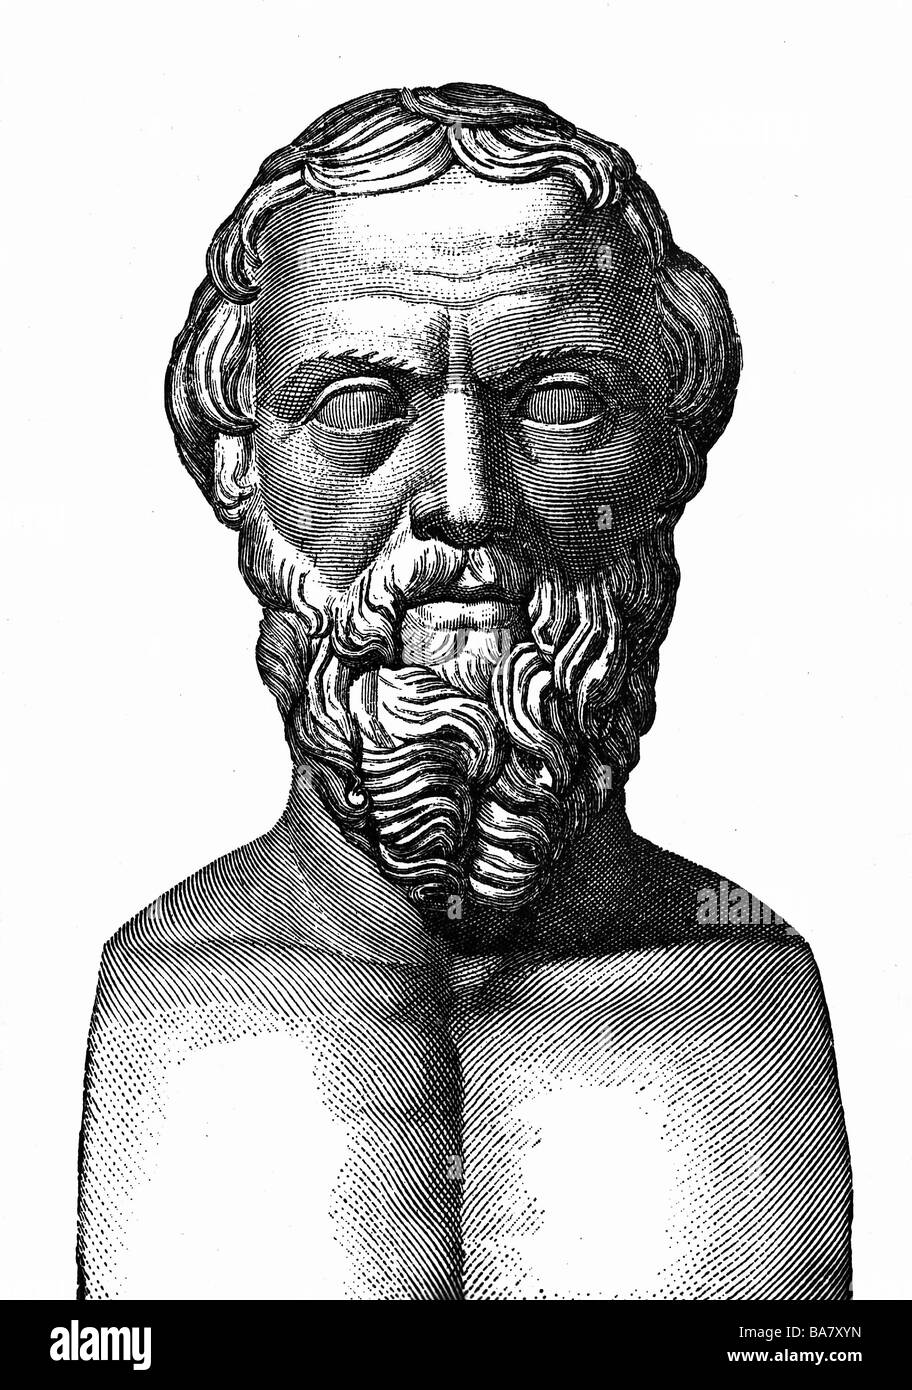 Herodotus, 484 BC - 425 BC, Greek scientist (historian), portrait, wood engraving after ancient bust, Stock Photo